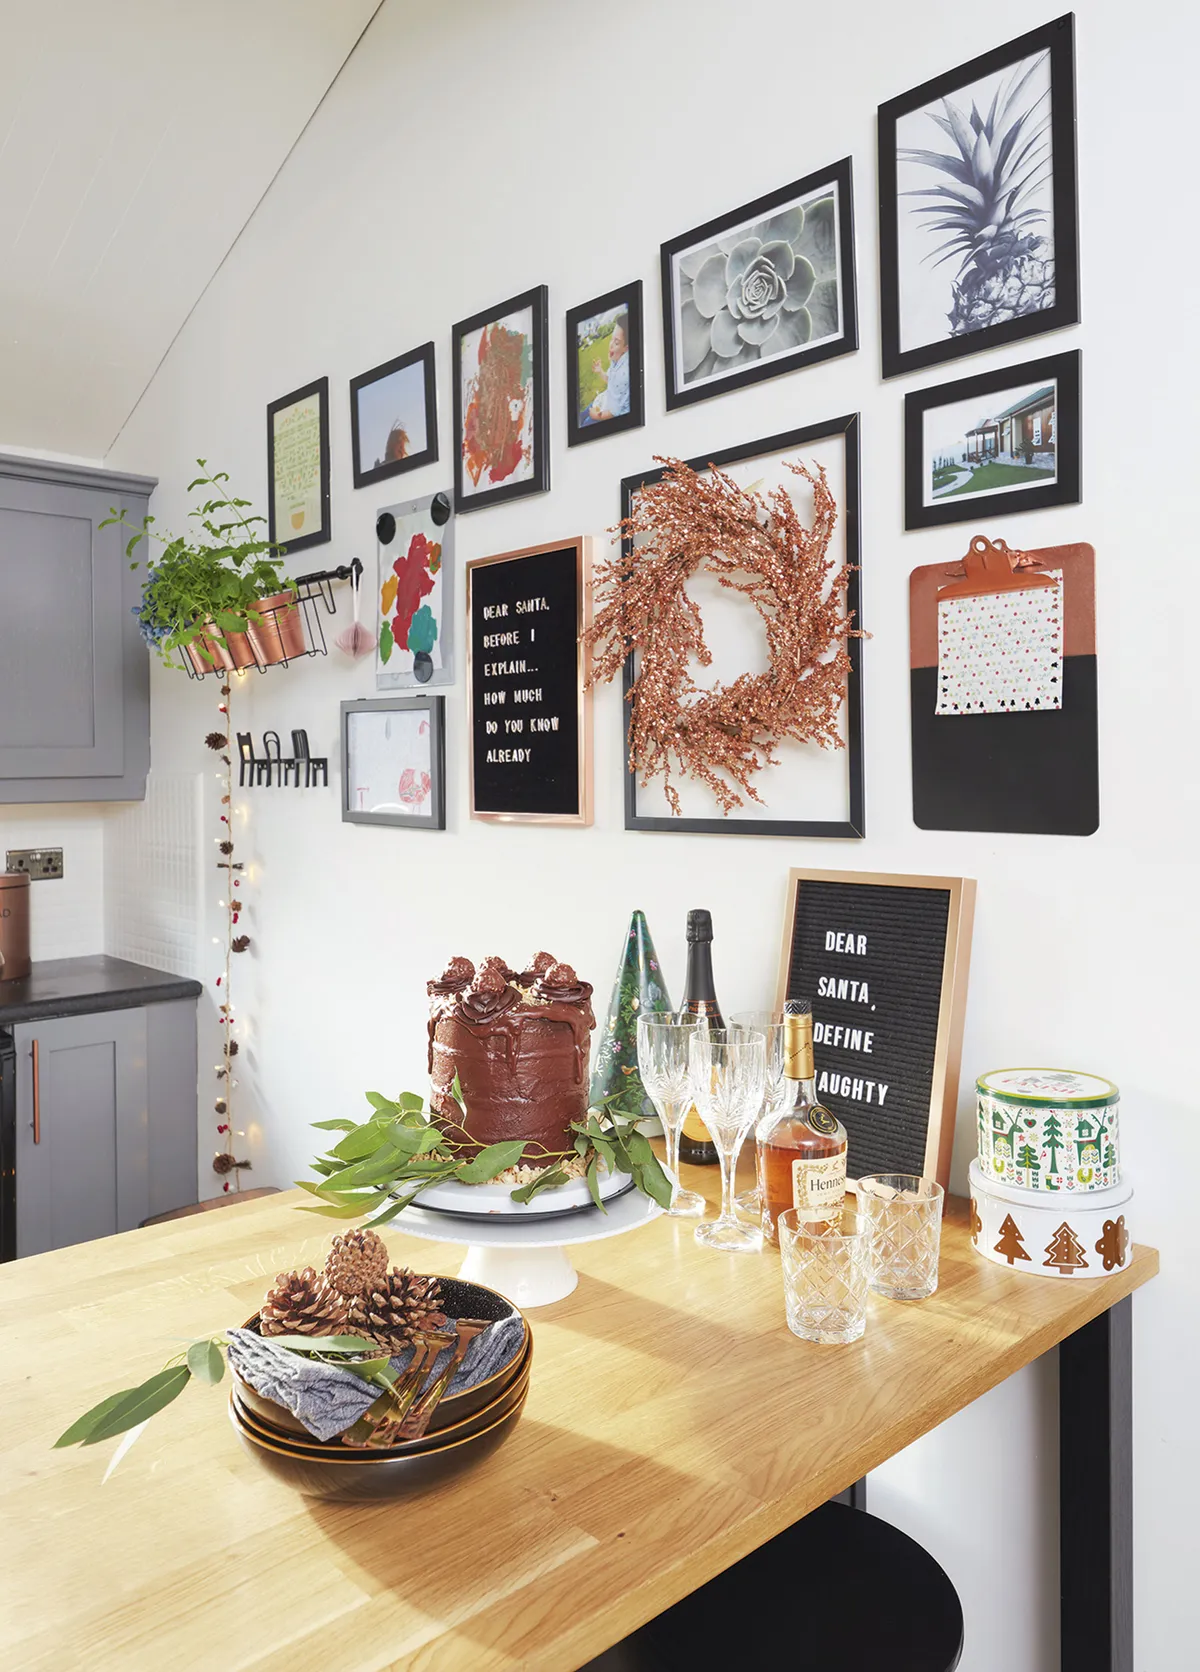 Ediana created a gallery wall using frames from IKEA. She spray-painted the plant pots copper and found a coordinating wreath in HomeSense. The chair hangers are from IKEA